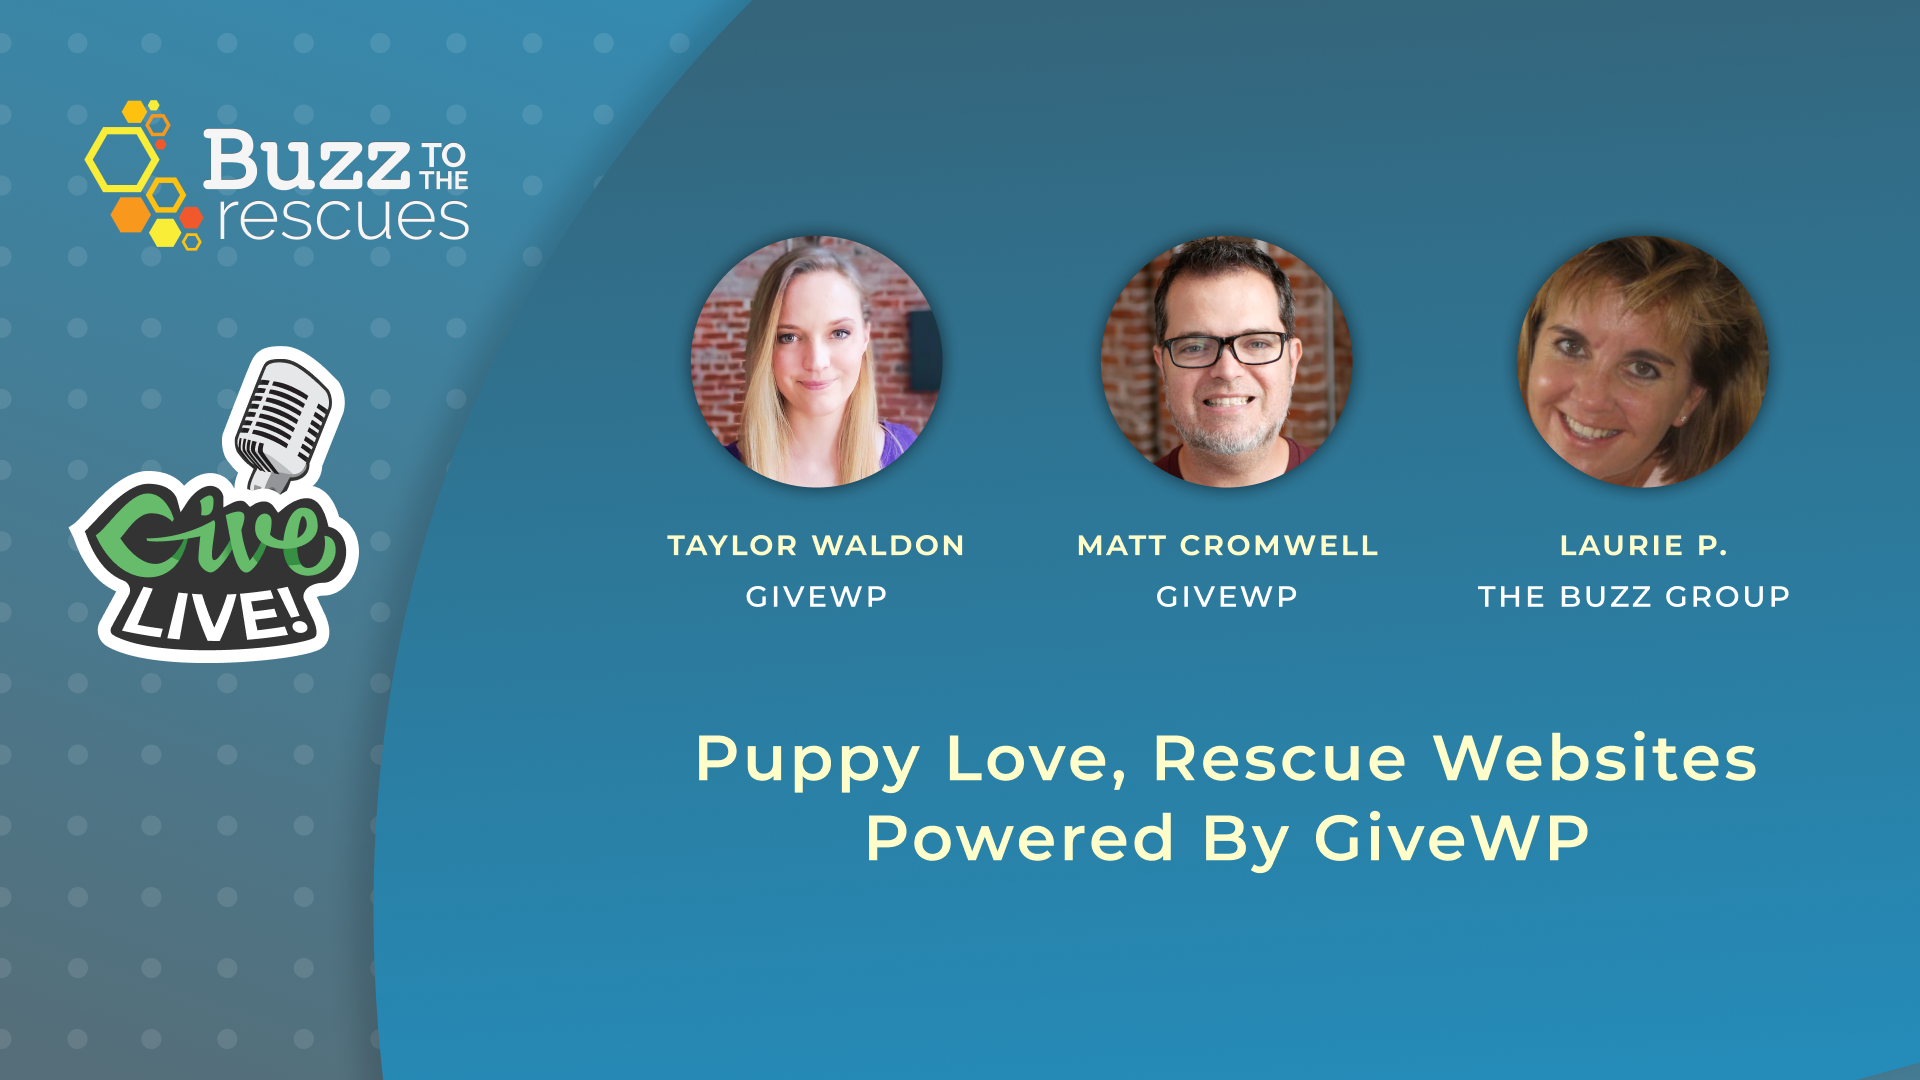 Puppy Love: Rescue Websites Powered by GiveWP